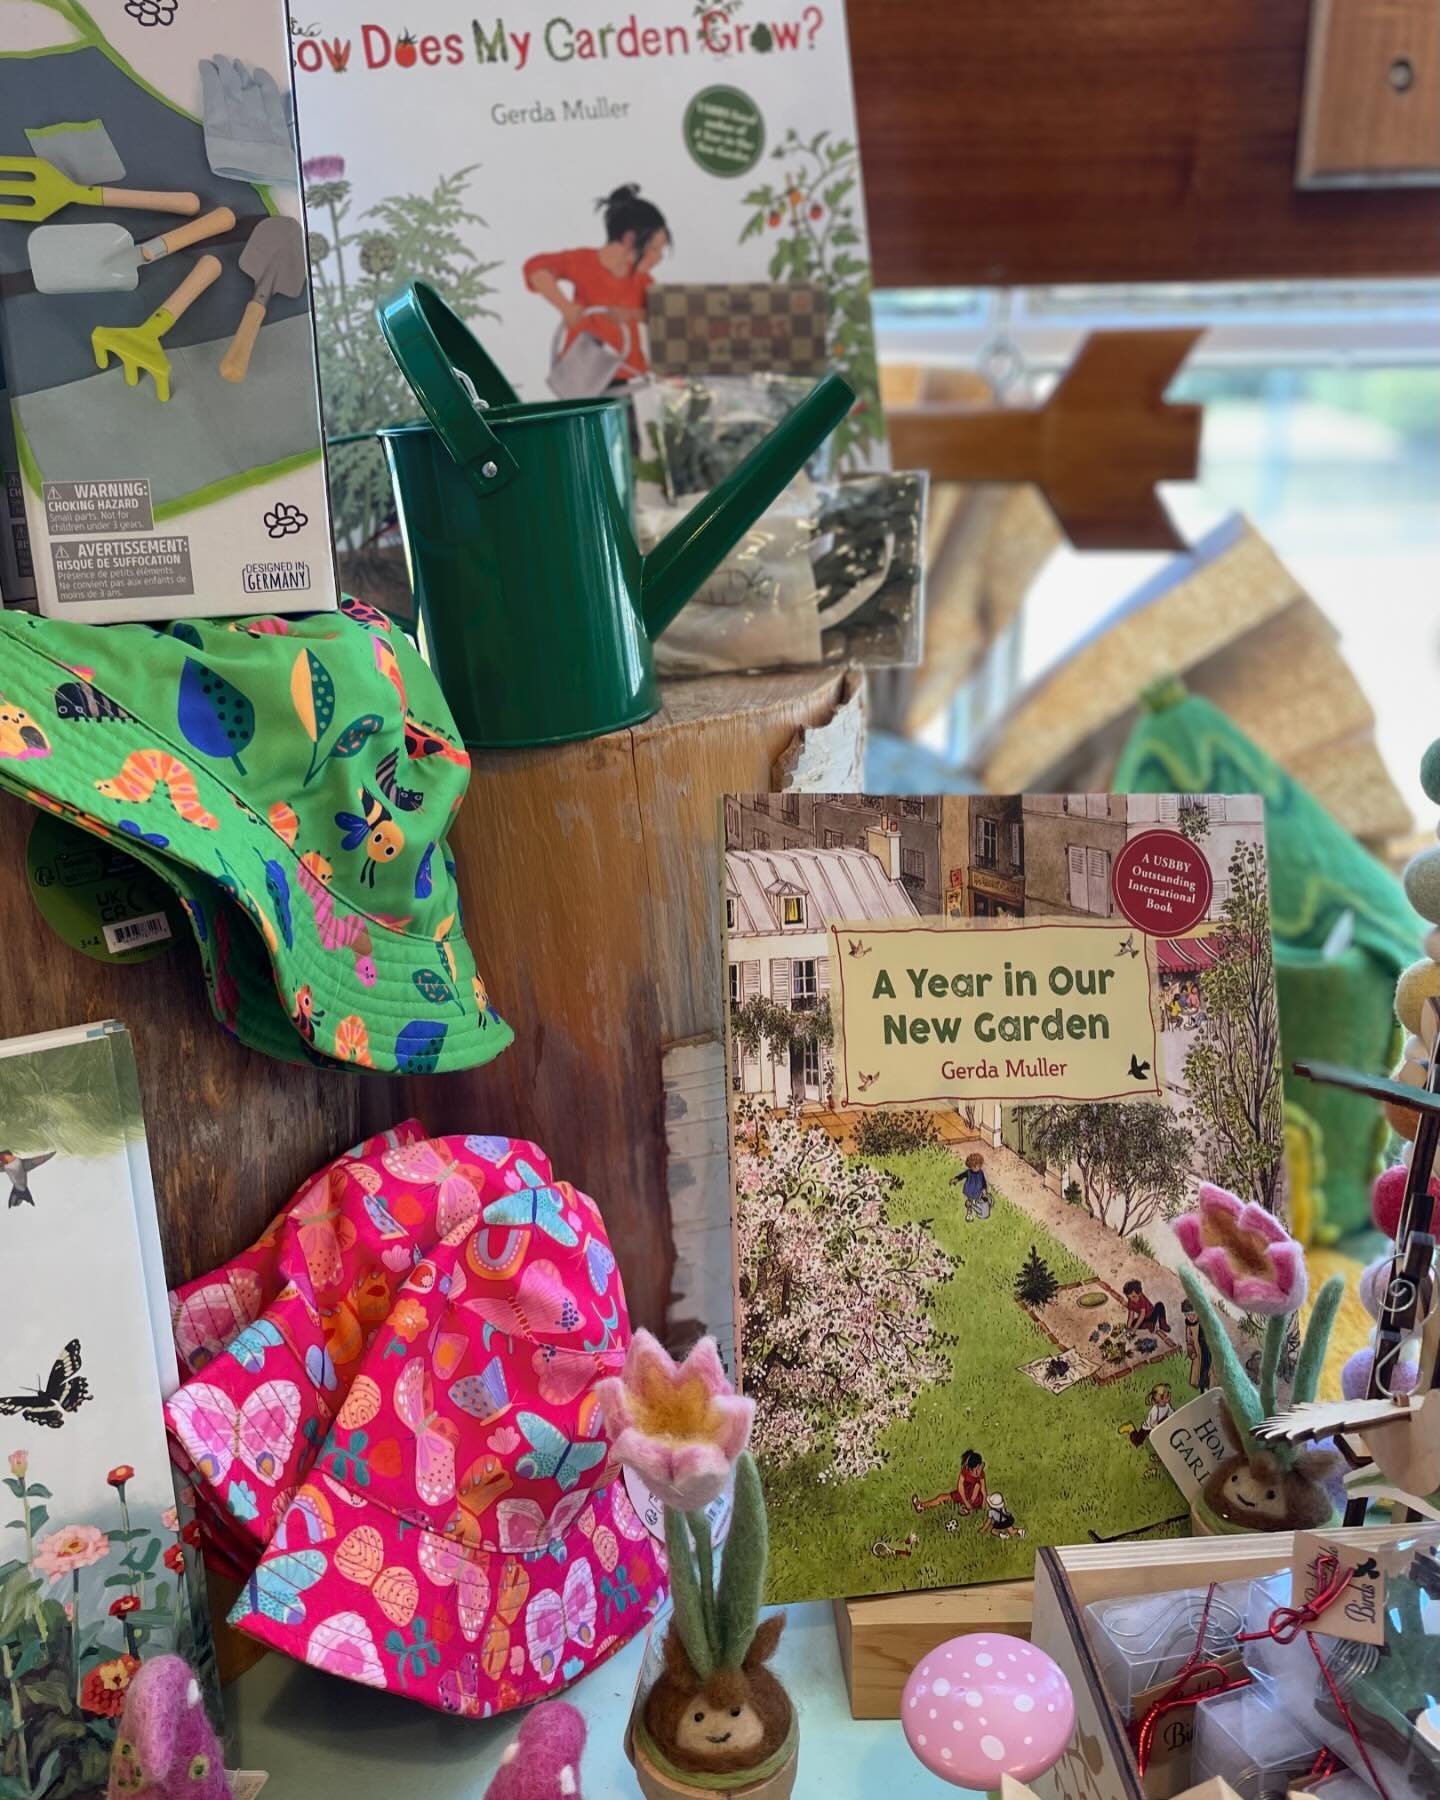 It&rsquo;s garden time!  Get out and dig in the dirt with your little ones - and read about it too!
-
-
@homespunwaldorf @waldorfschooloflexington #outdoorkids #gardening #diginthedirt #florisbooks #gerdamuller #flowerpower #shopsmall #lexingtonma